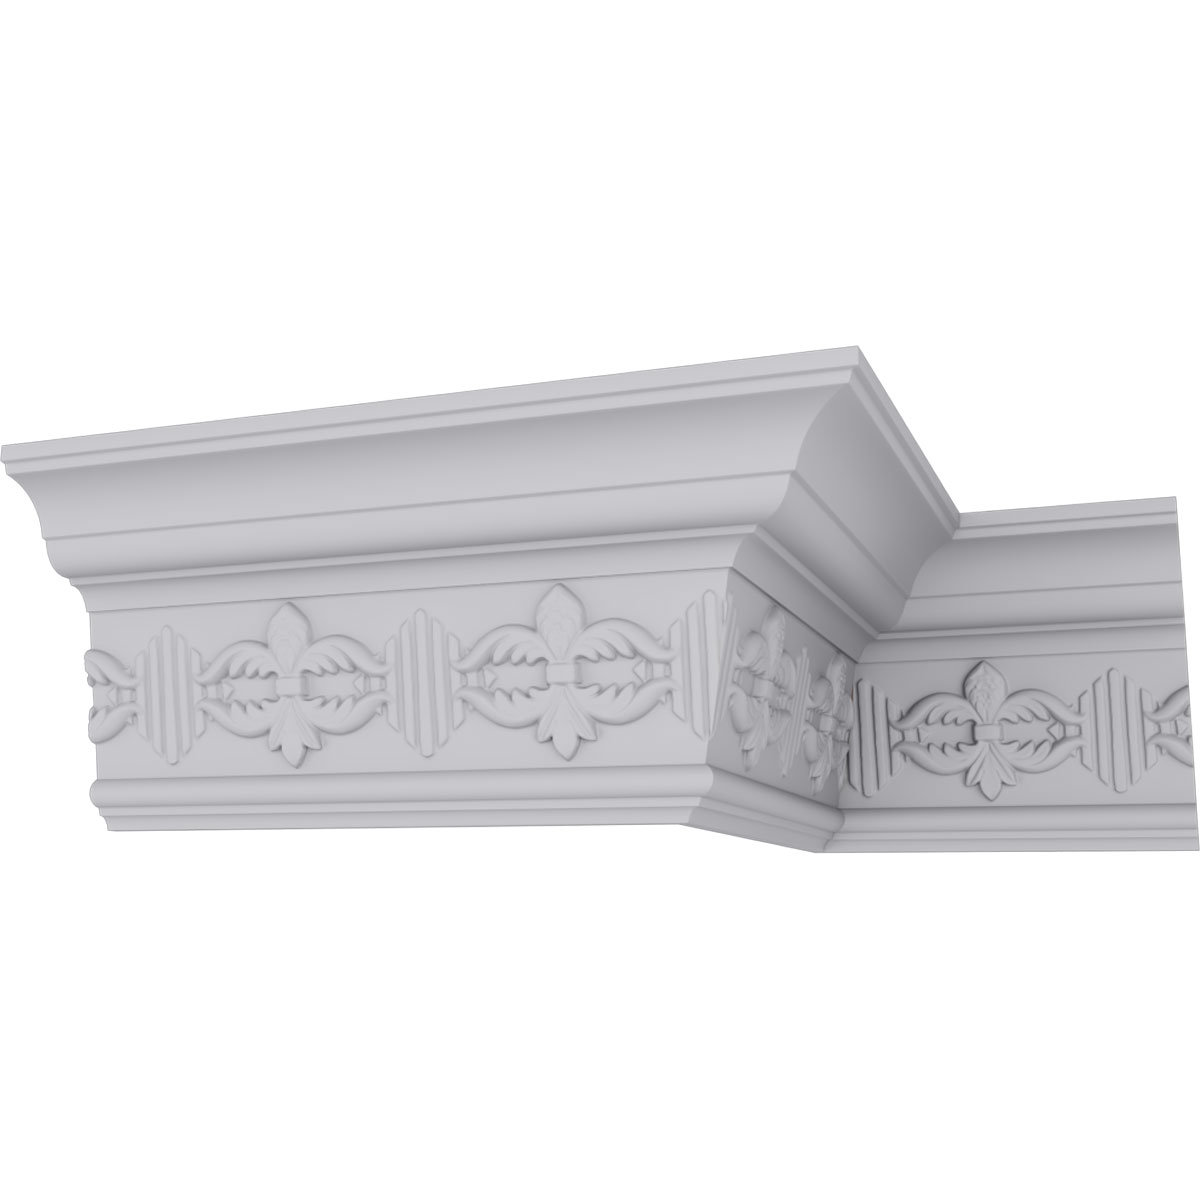 Ekena Millwork 17-1/8 in. x 3 in. x 7/8 in. Versailles Large Ribbon with  Bow Center Onlay ONL17X03X01VE - The Home Depot